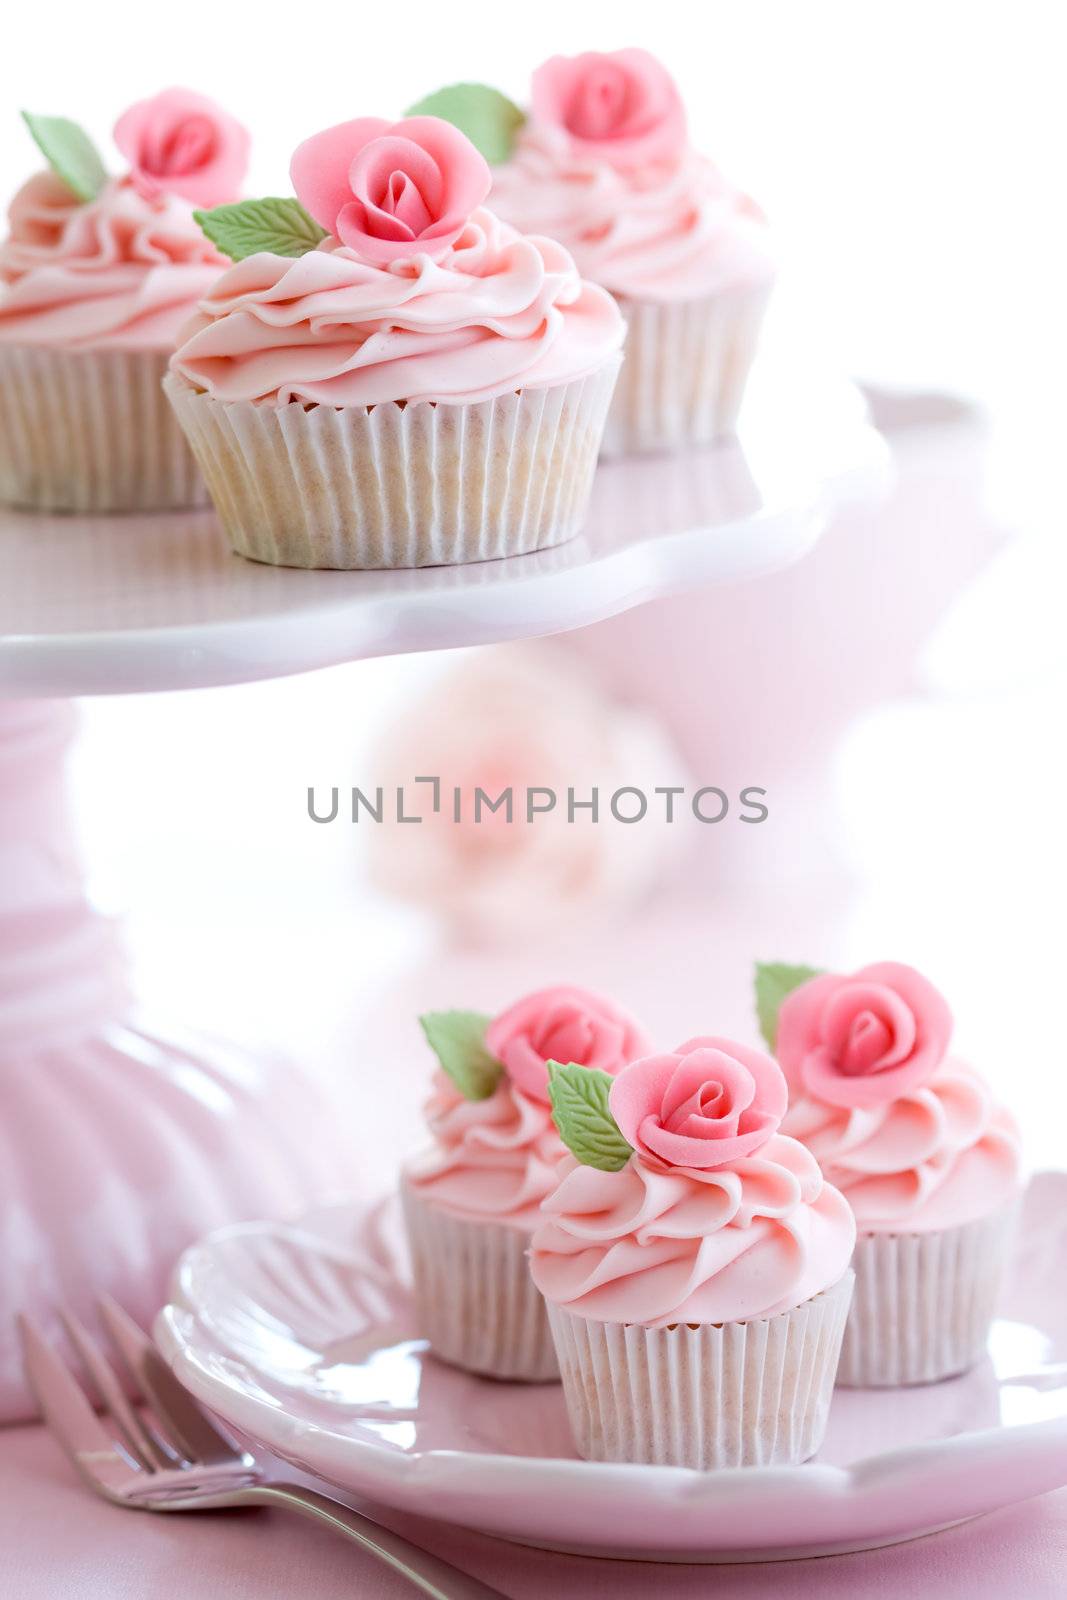 Rosebud cupcakes served on a pink cakestand